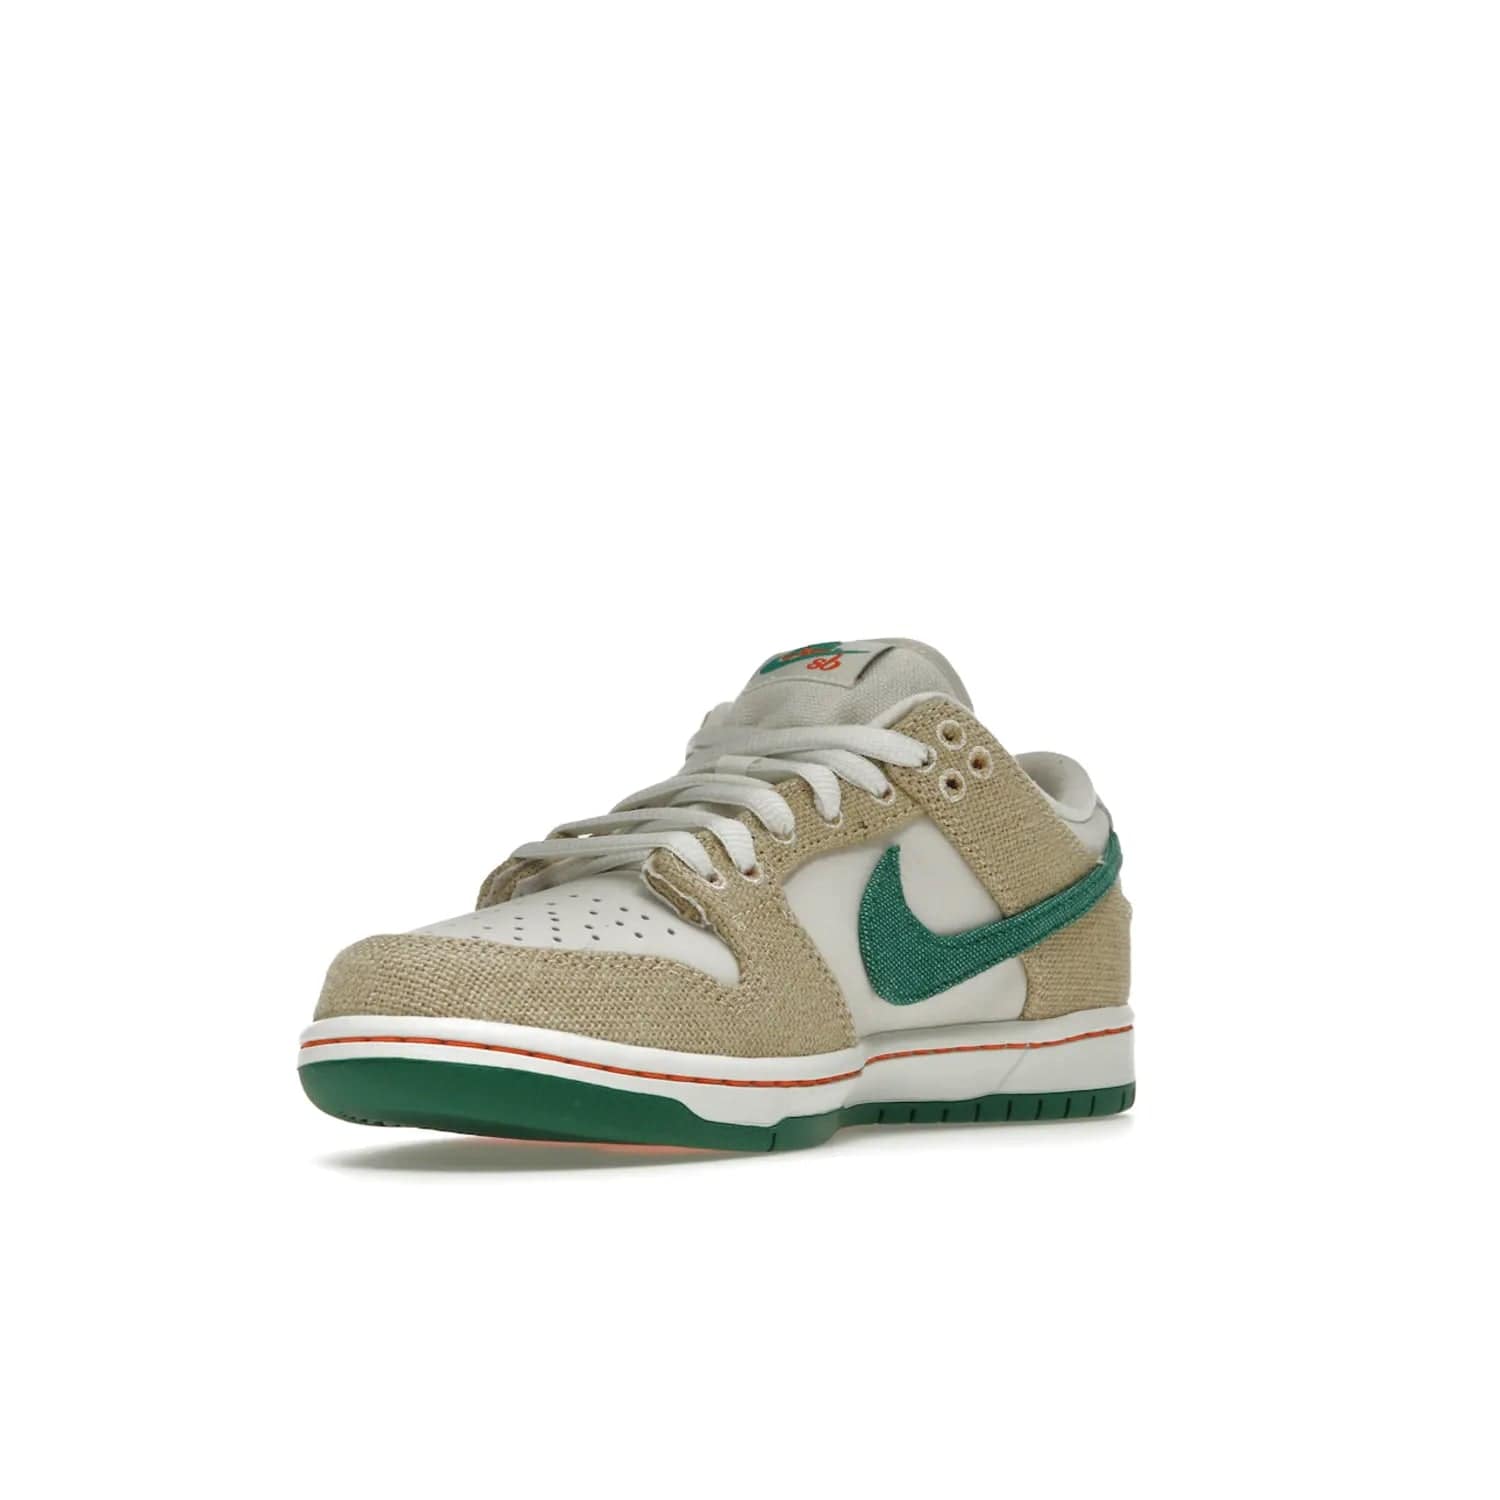 Nike SB Dunk Low Jarritos - Image 14 - Only at www.BallersClubKickz.com - Shop limited edition Nike SB Dunk Low Jarritos! Crafted with white leather and tear-away canvas materials with green accents. Includes orange, green, and white laces to customize your look. Available now.